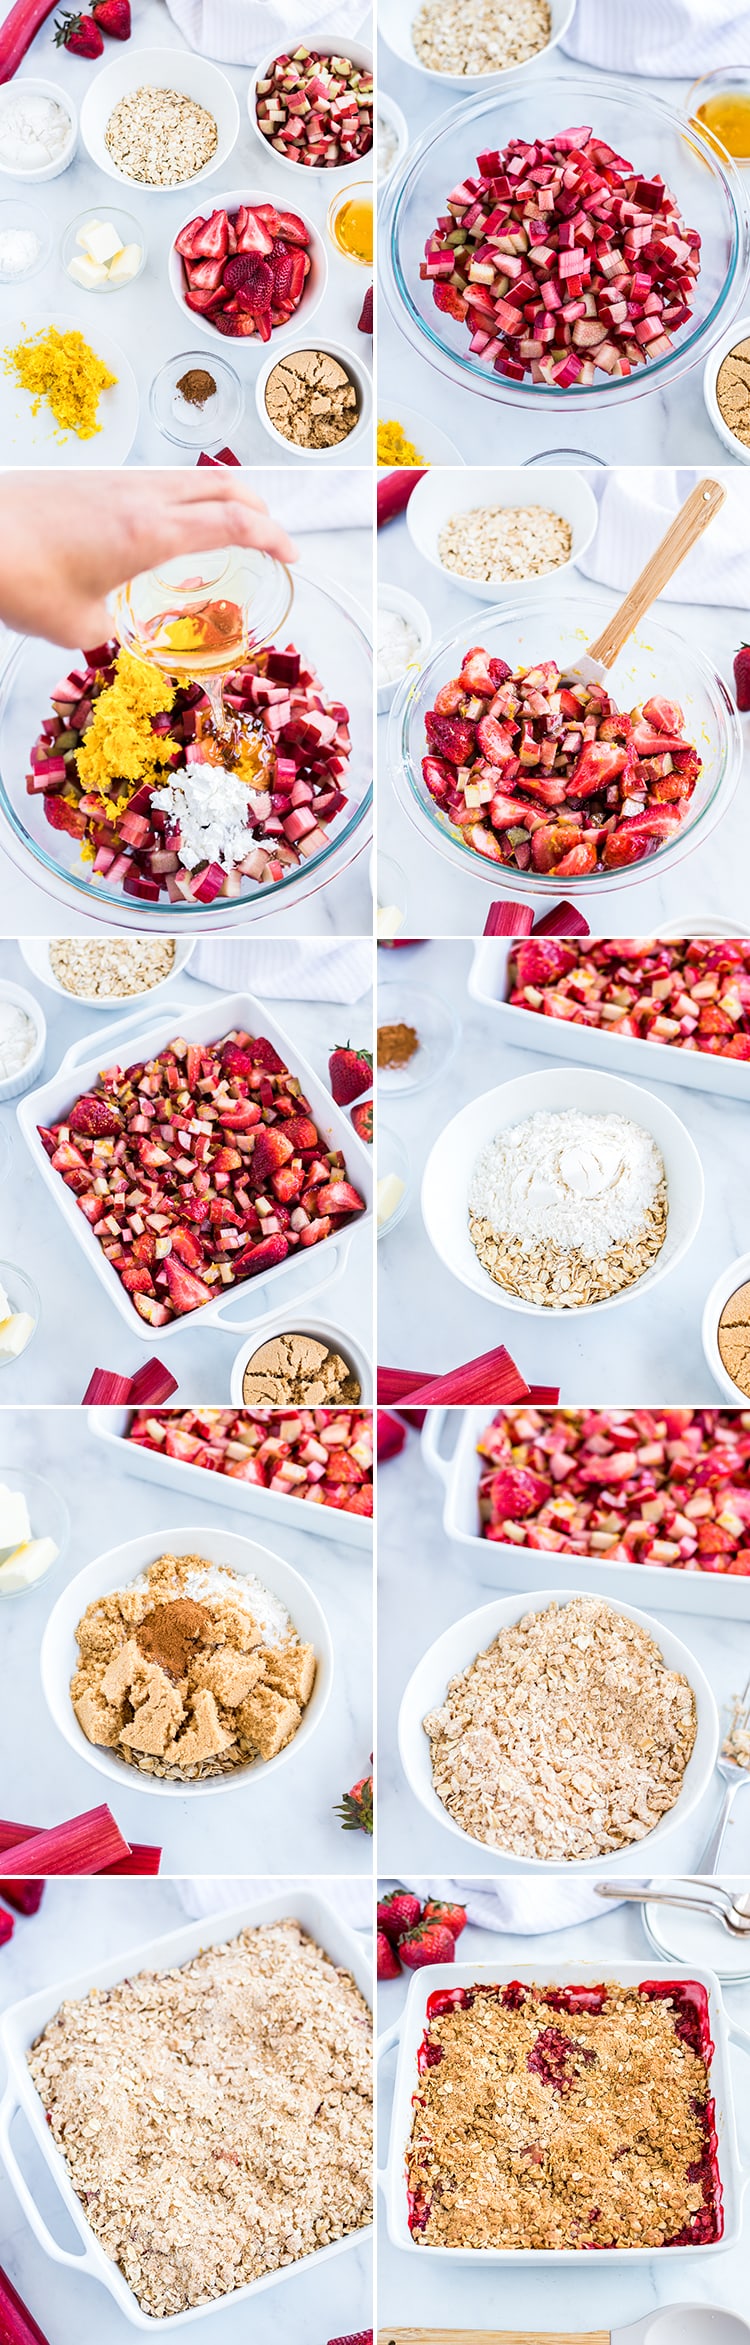 Step by step photos of how to make strawberry rhubarb crumble with each ingredient.